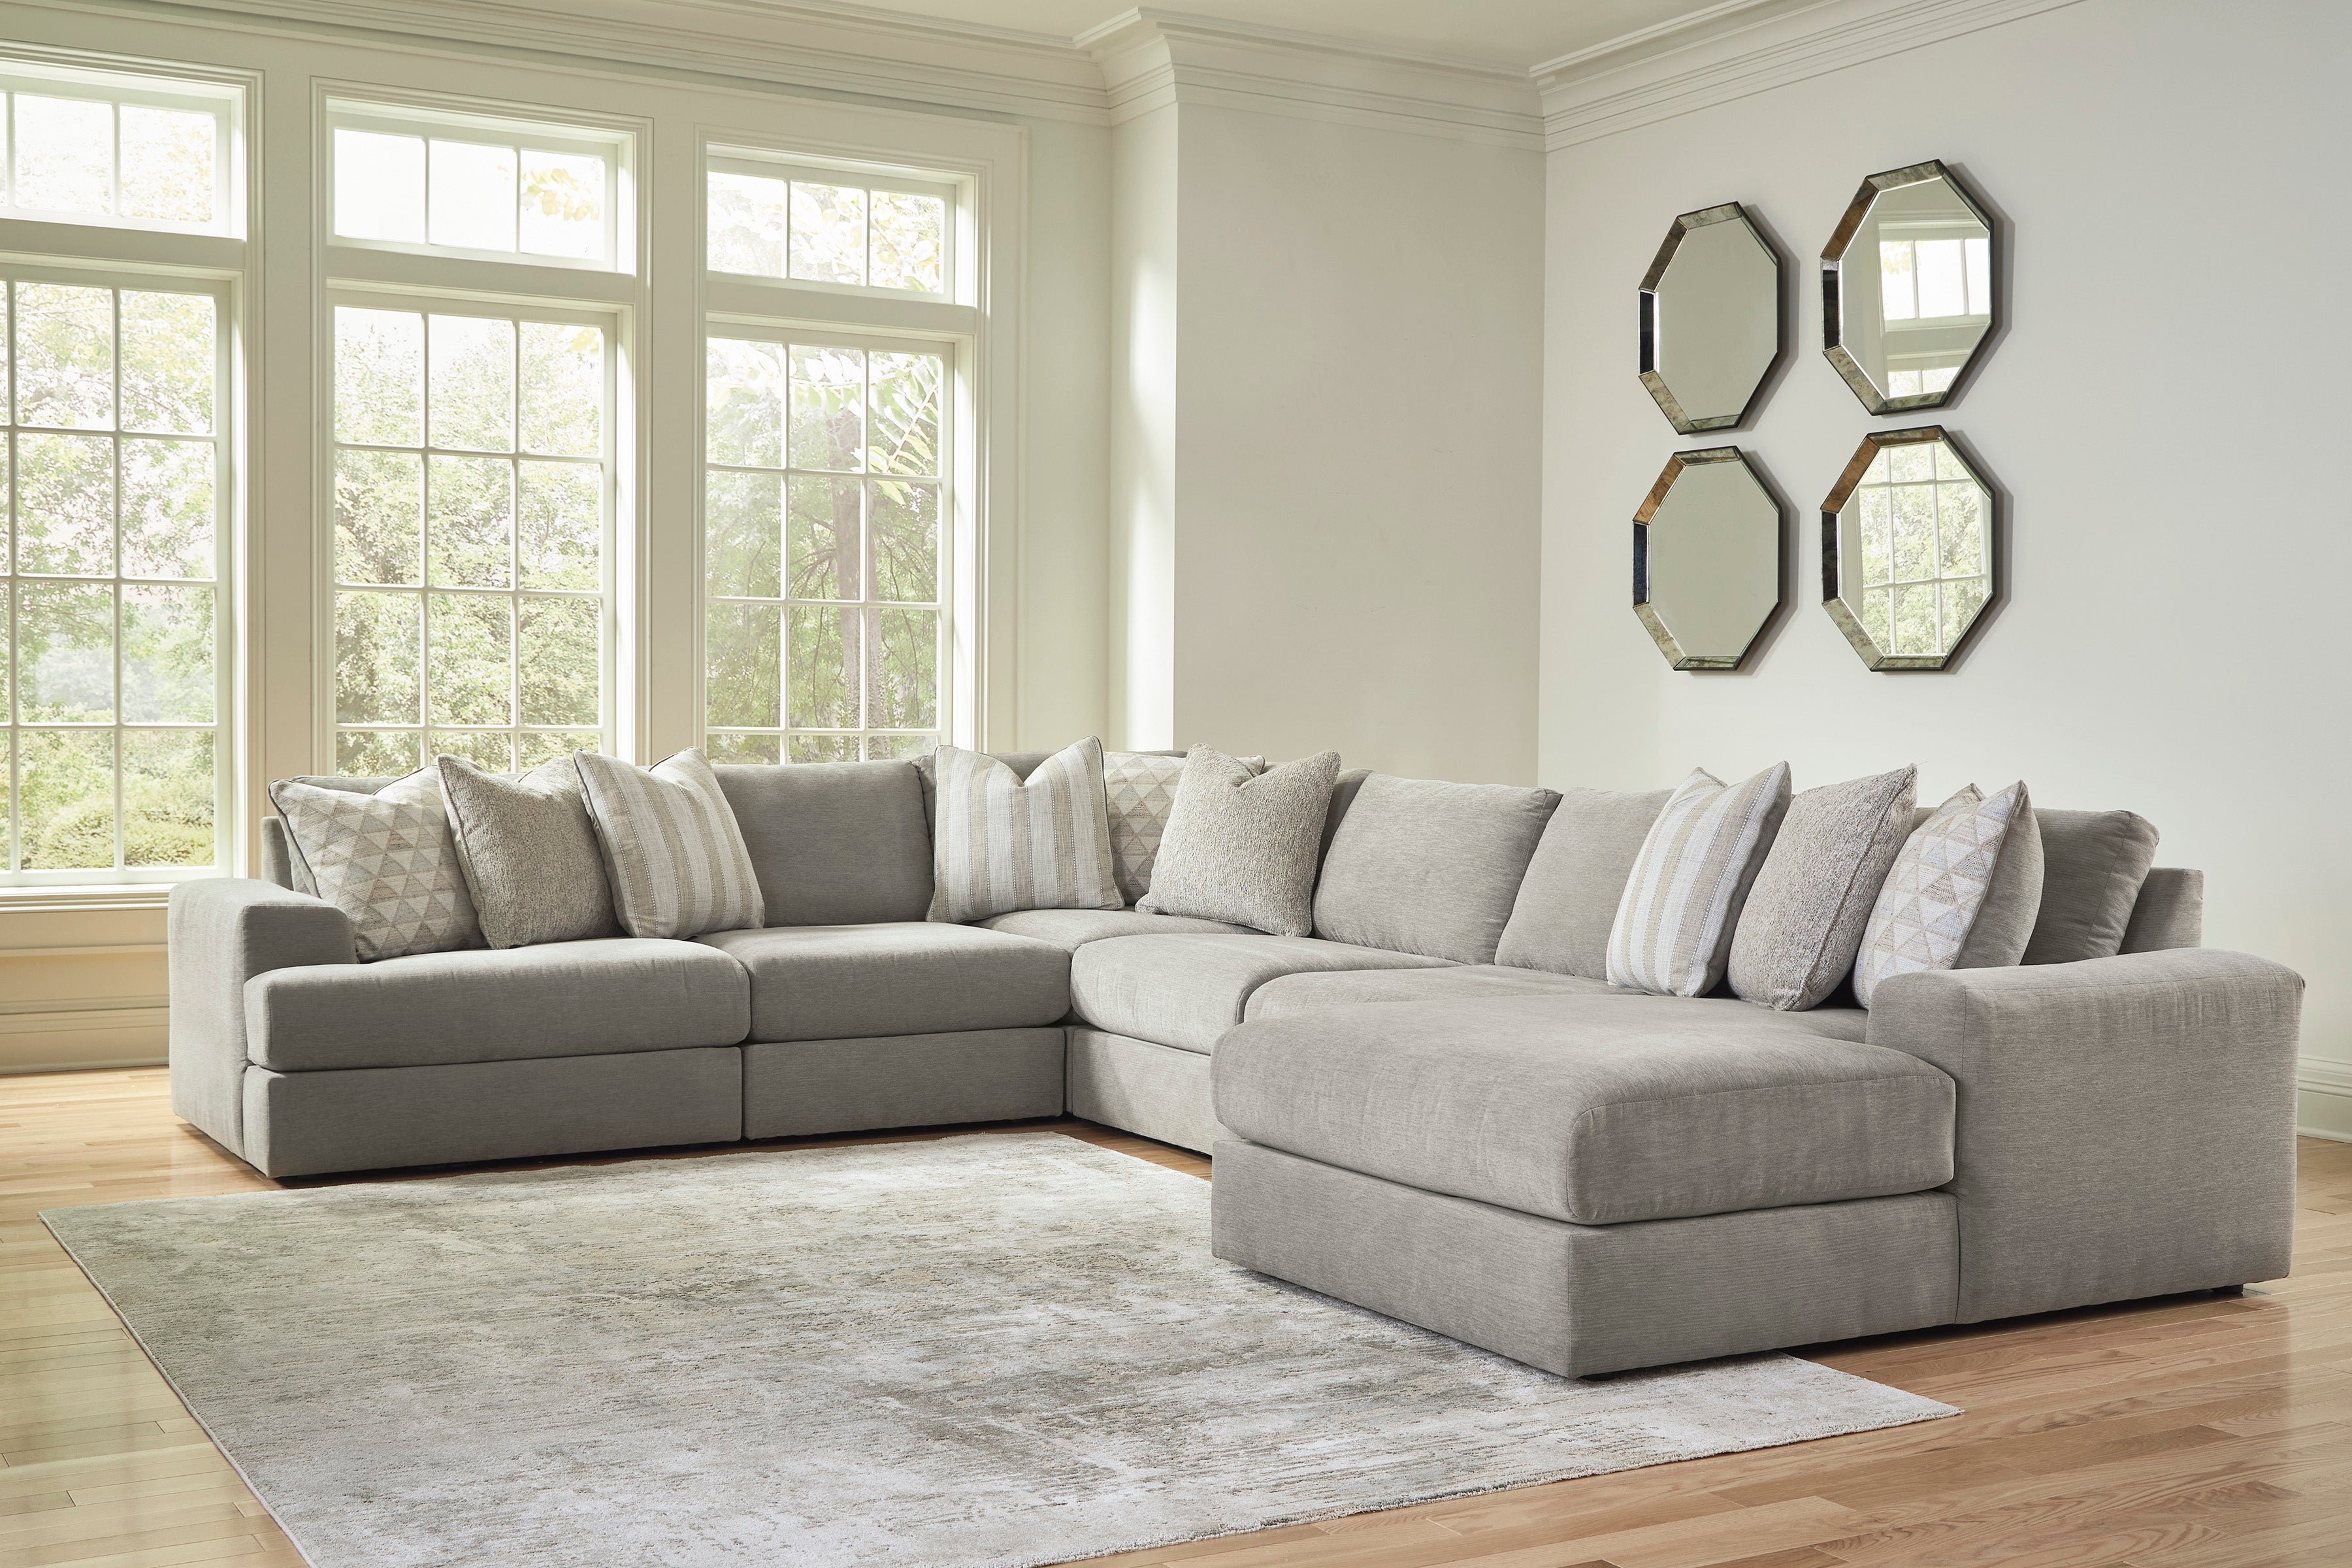 Avaliyah Ash 6-Piece RAF Chaise Sectional - SET | 5810317 | 5810346 | 5810346 | 5810346 | 5810377 | 5810364 - Bien Home Furniture &amp; Electronics